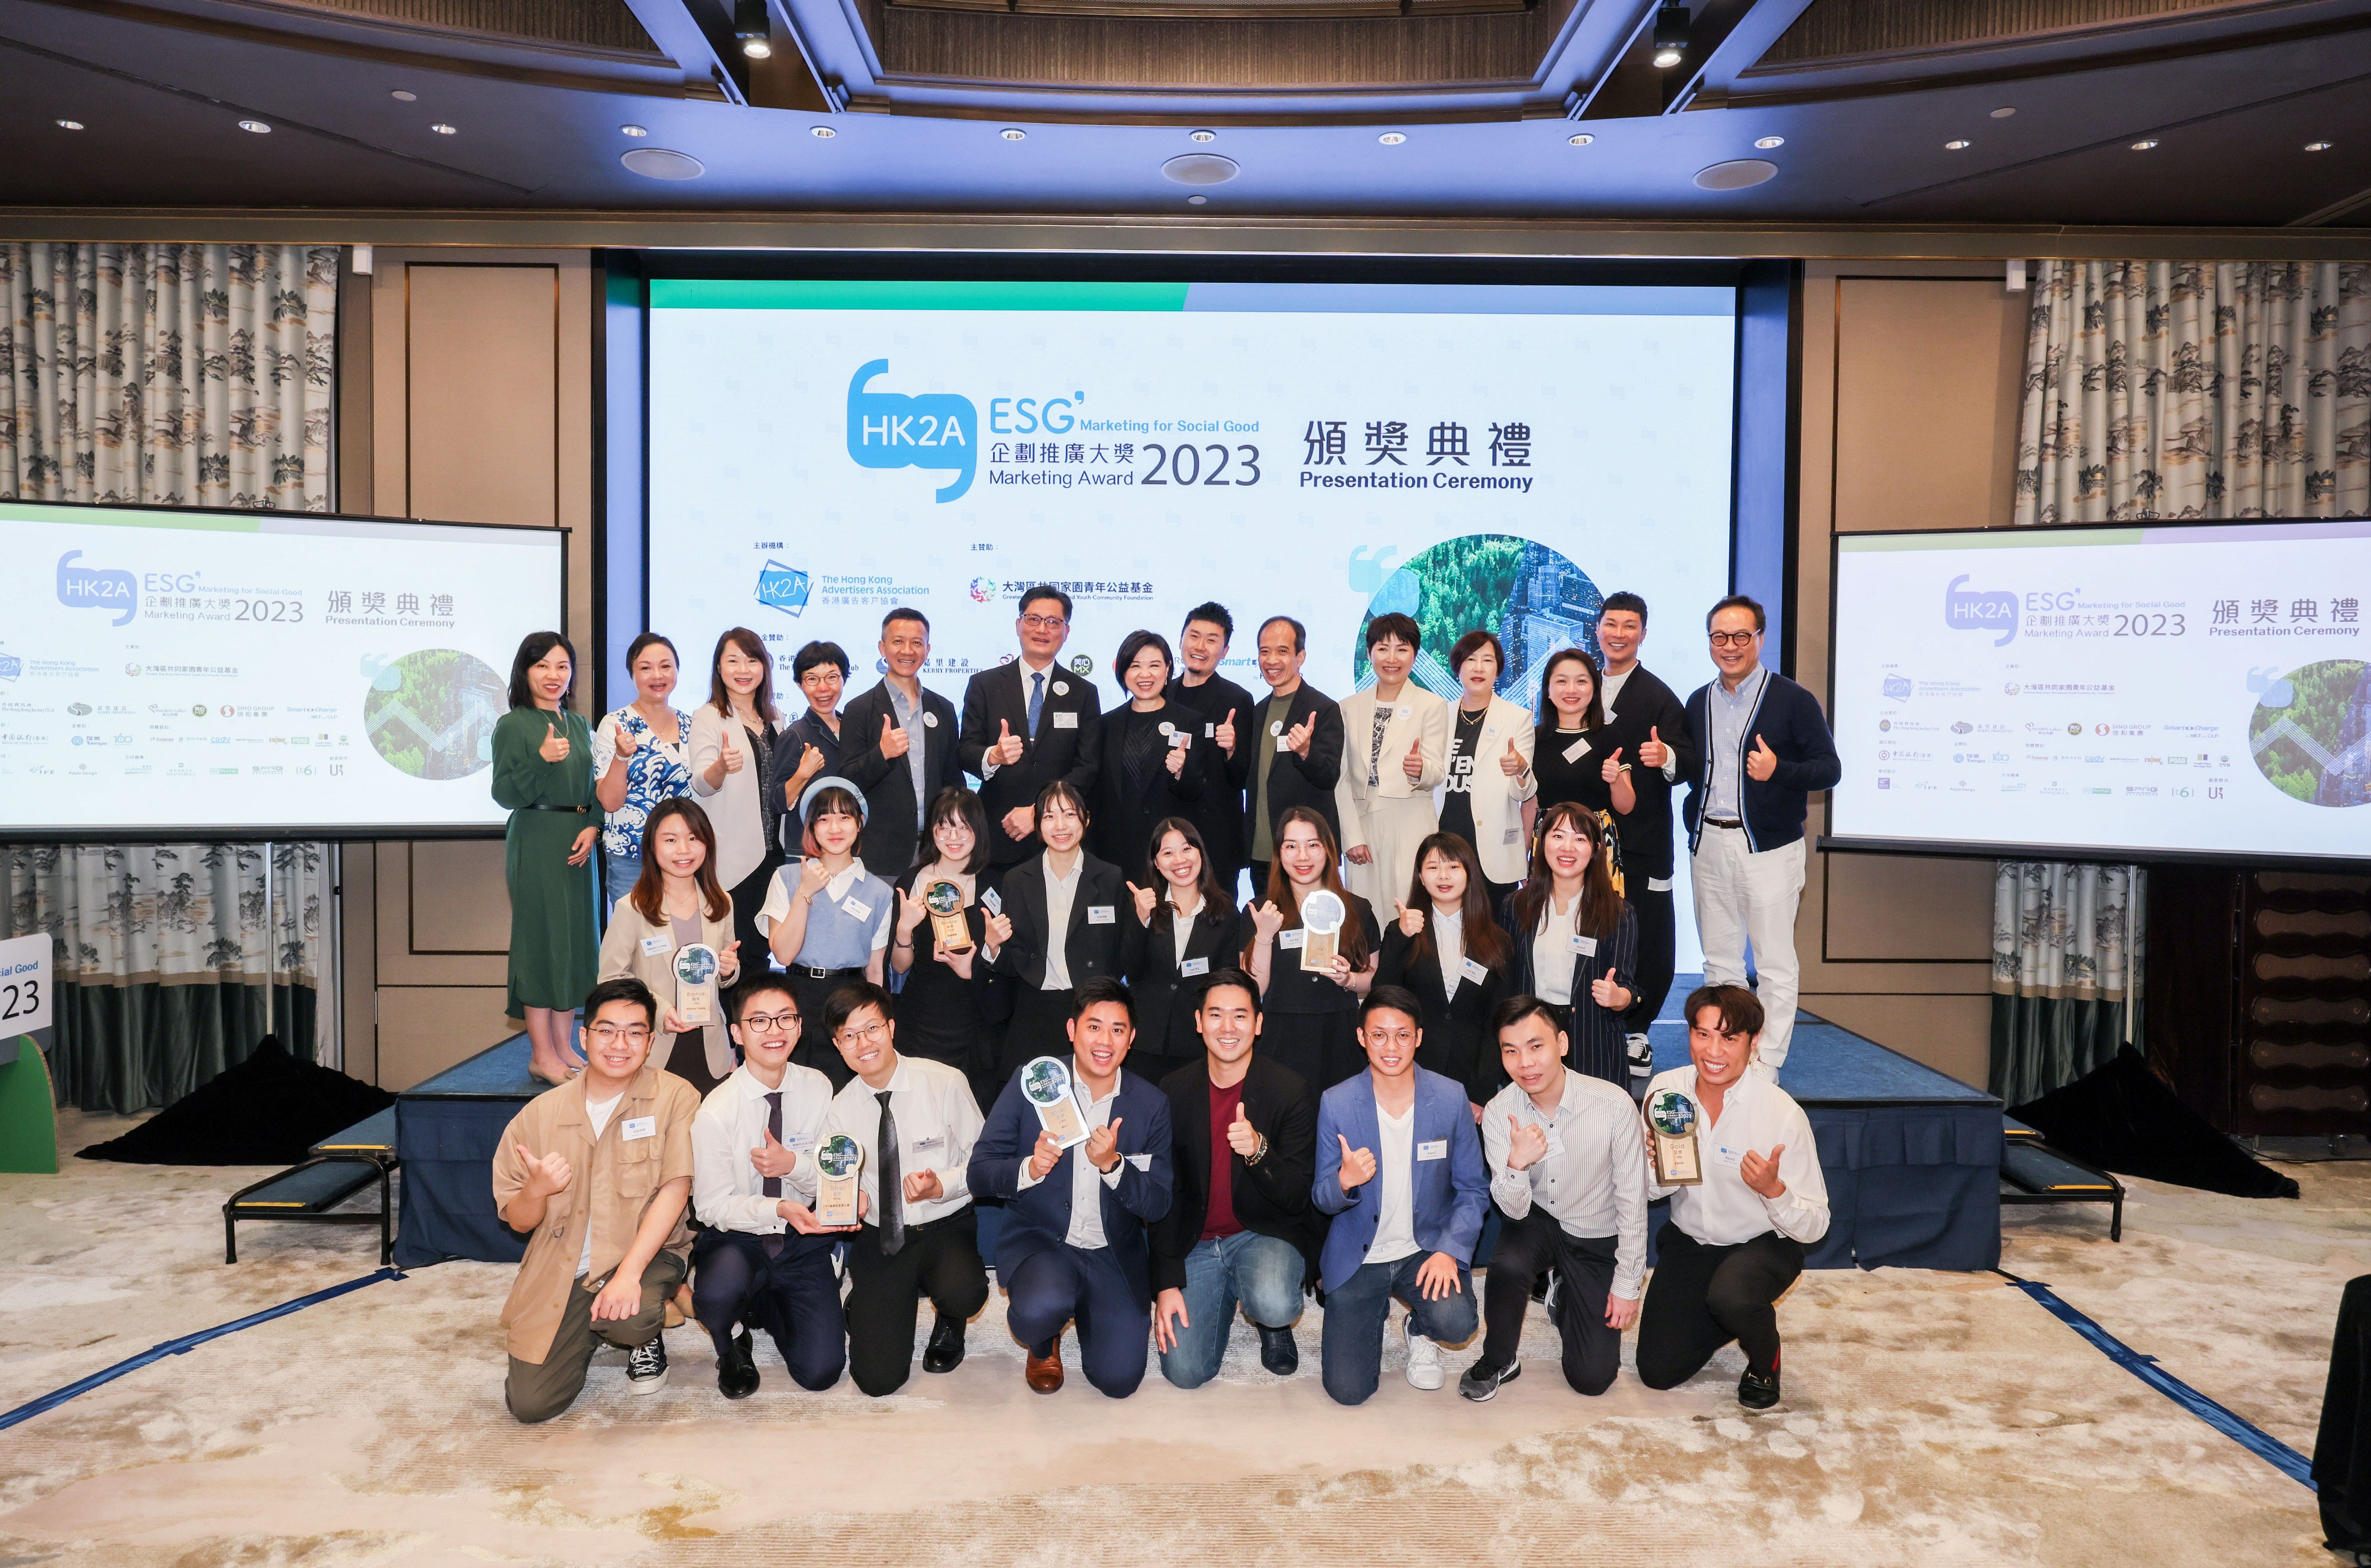 The Hong Kong Advertisers Association (HK2A) committee and the judging panel of the HK2A ESG Marketing Awards (back row) with the awards’ winning contestants (front two rows). 